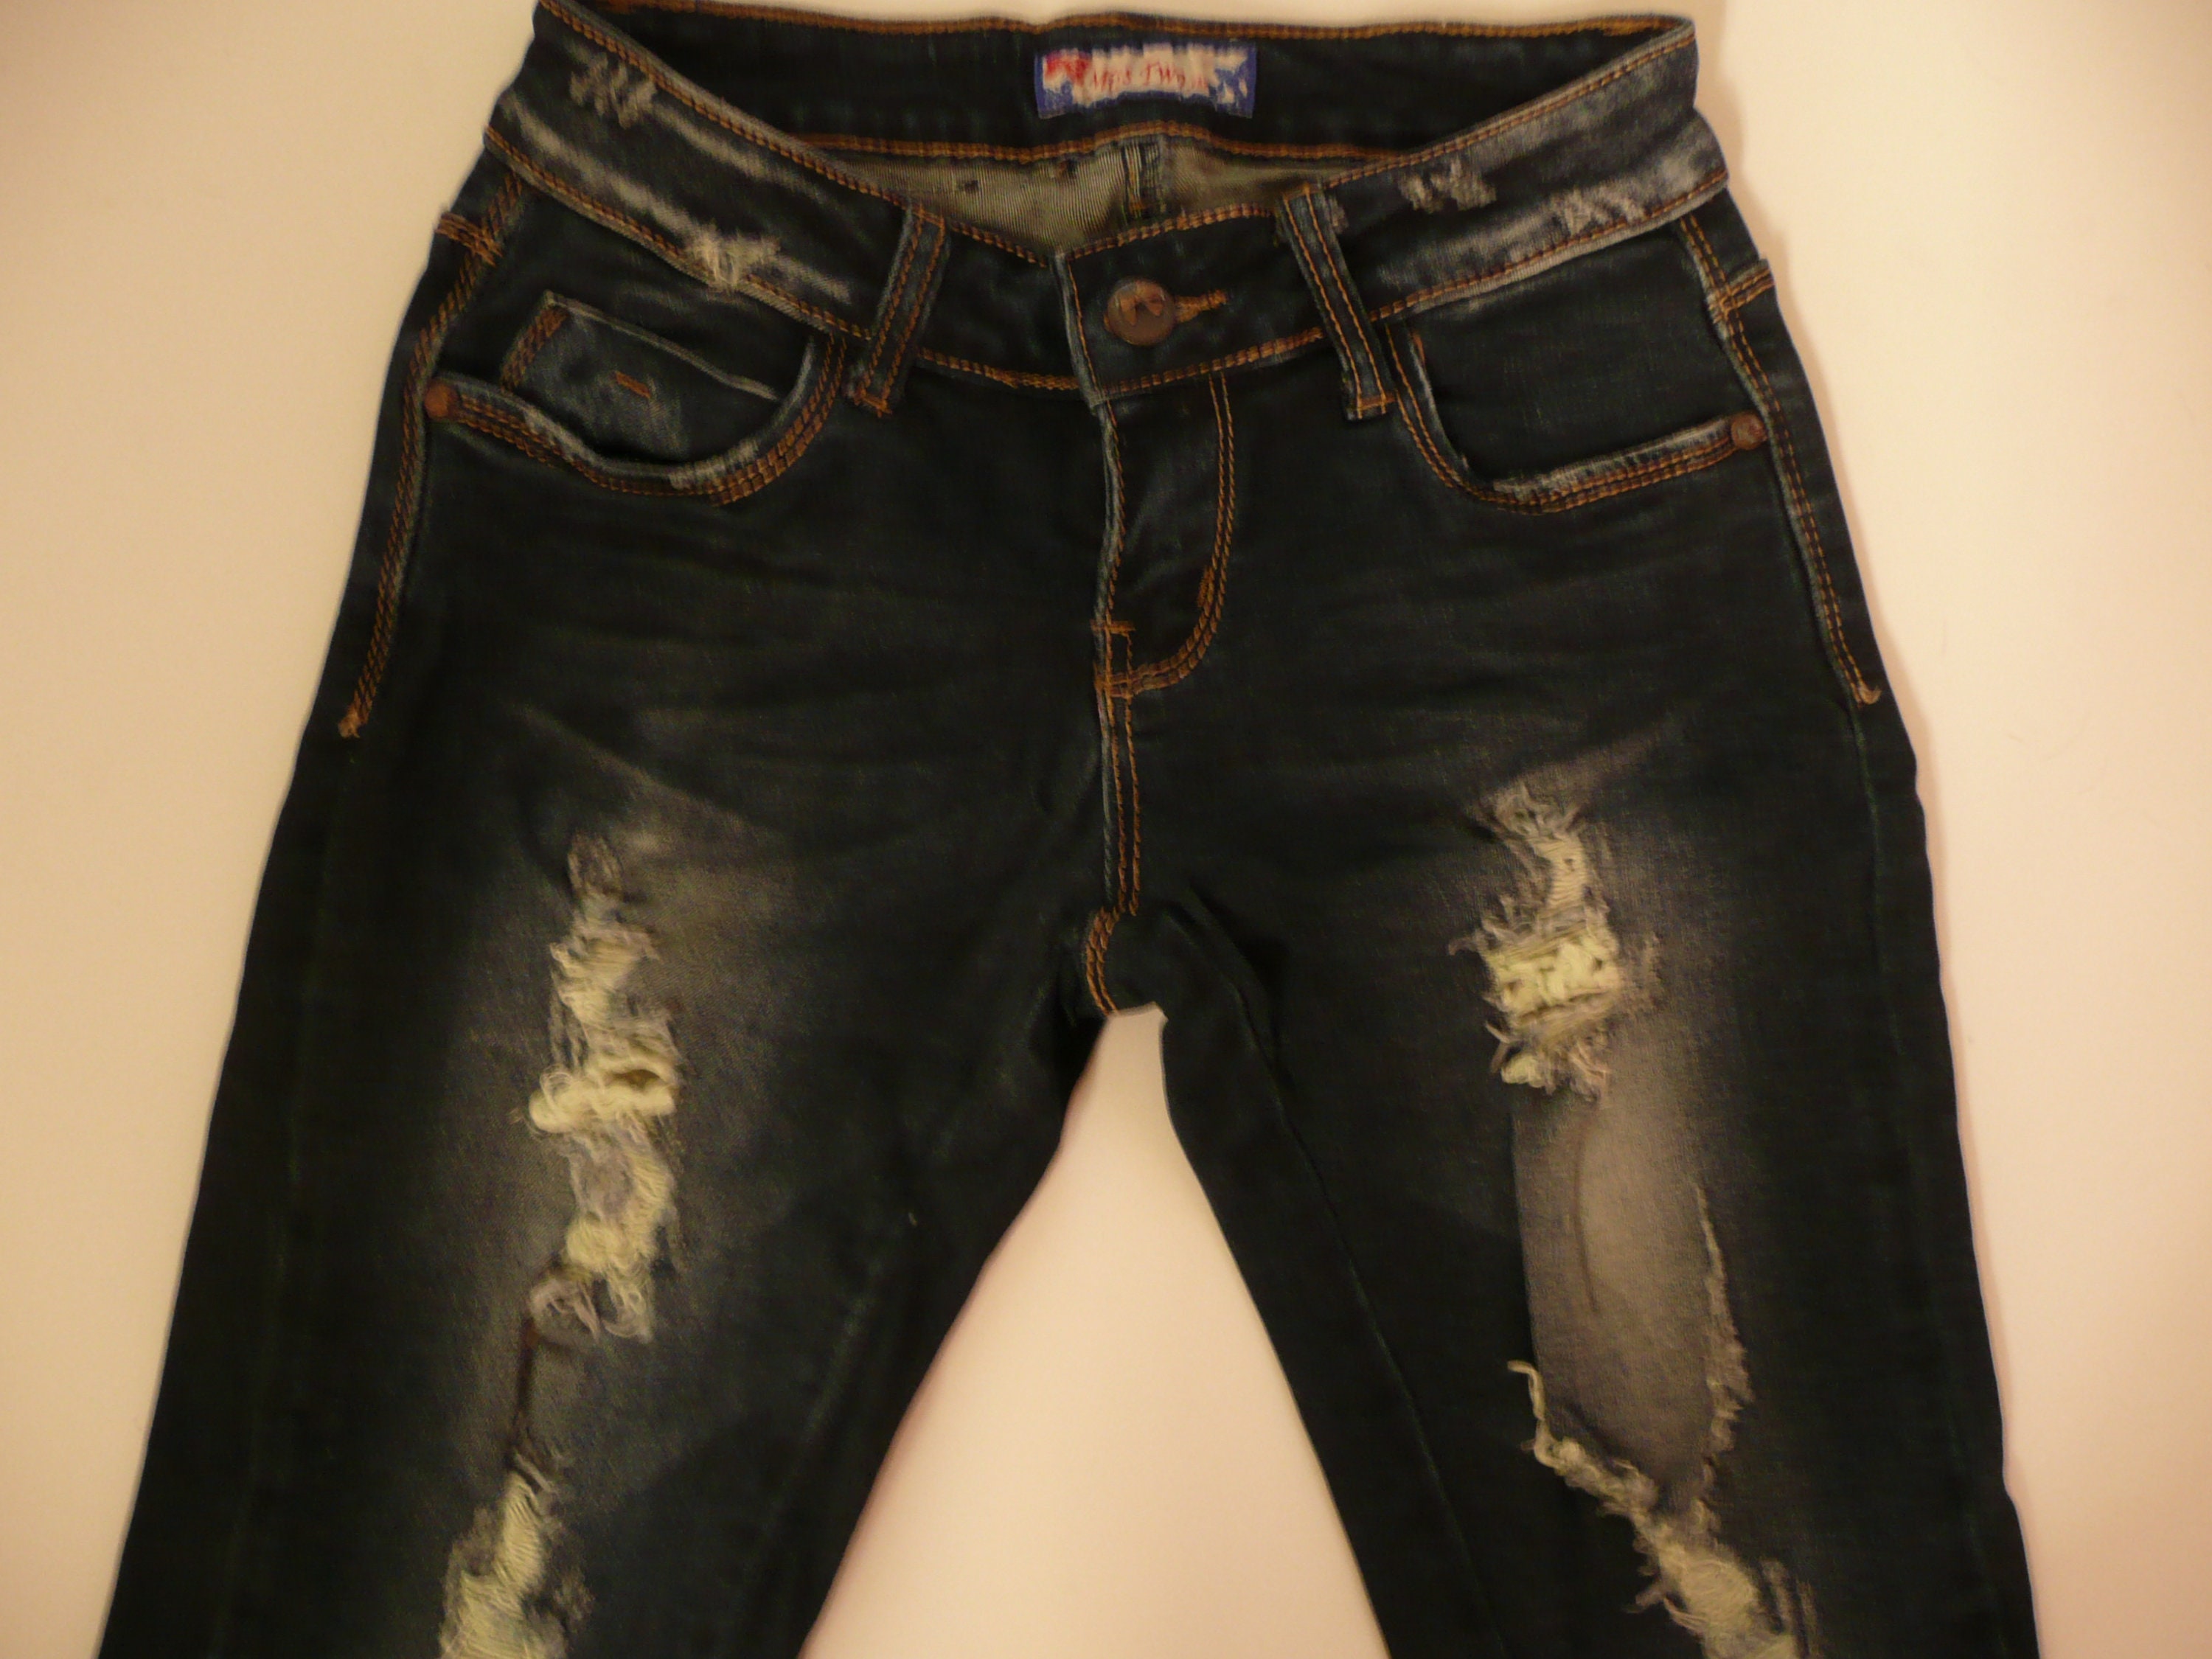 Miss Me Jeans Denim Mid Rise Distressed Ripped Frayed Cuffed Mid Shorts Light 28 